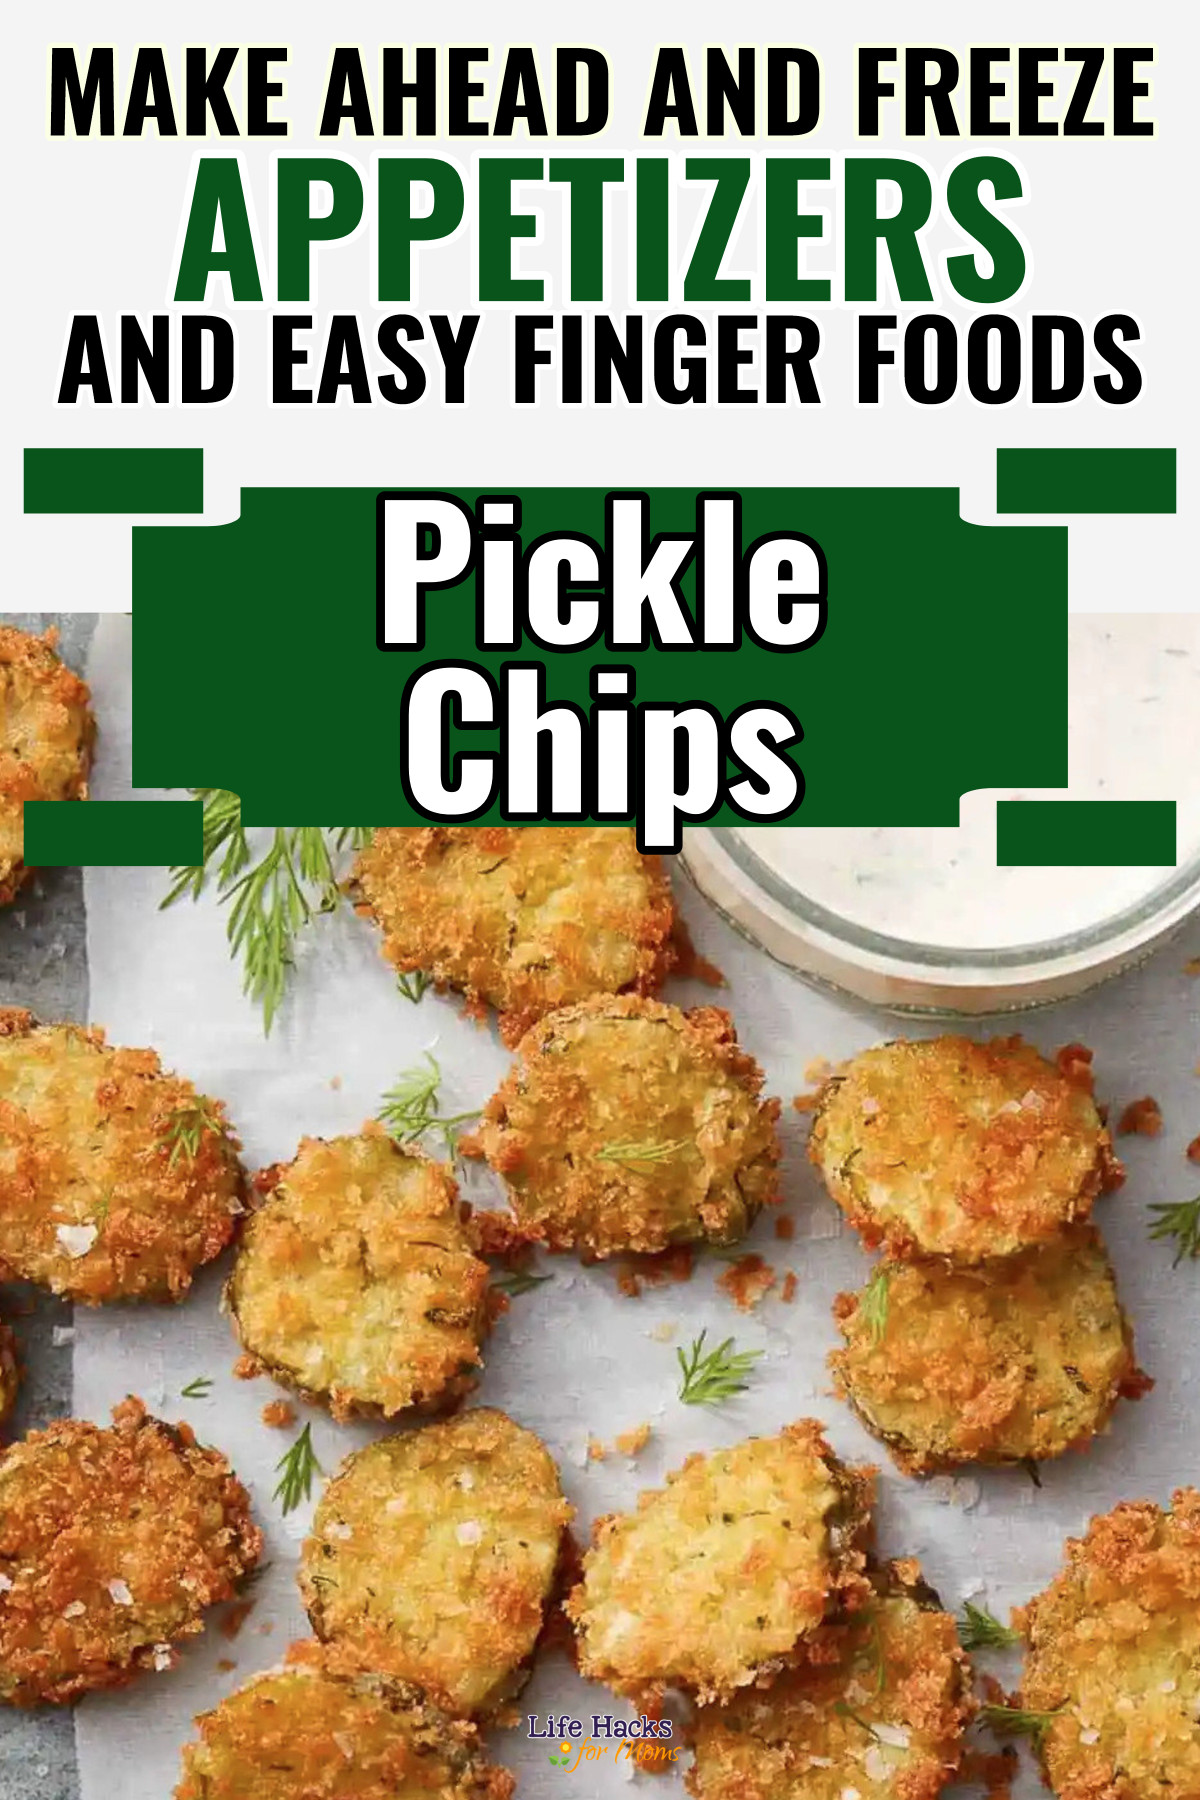 Make Ahead And Freeze Appetizers - Pickle Chips